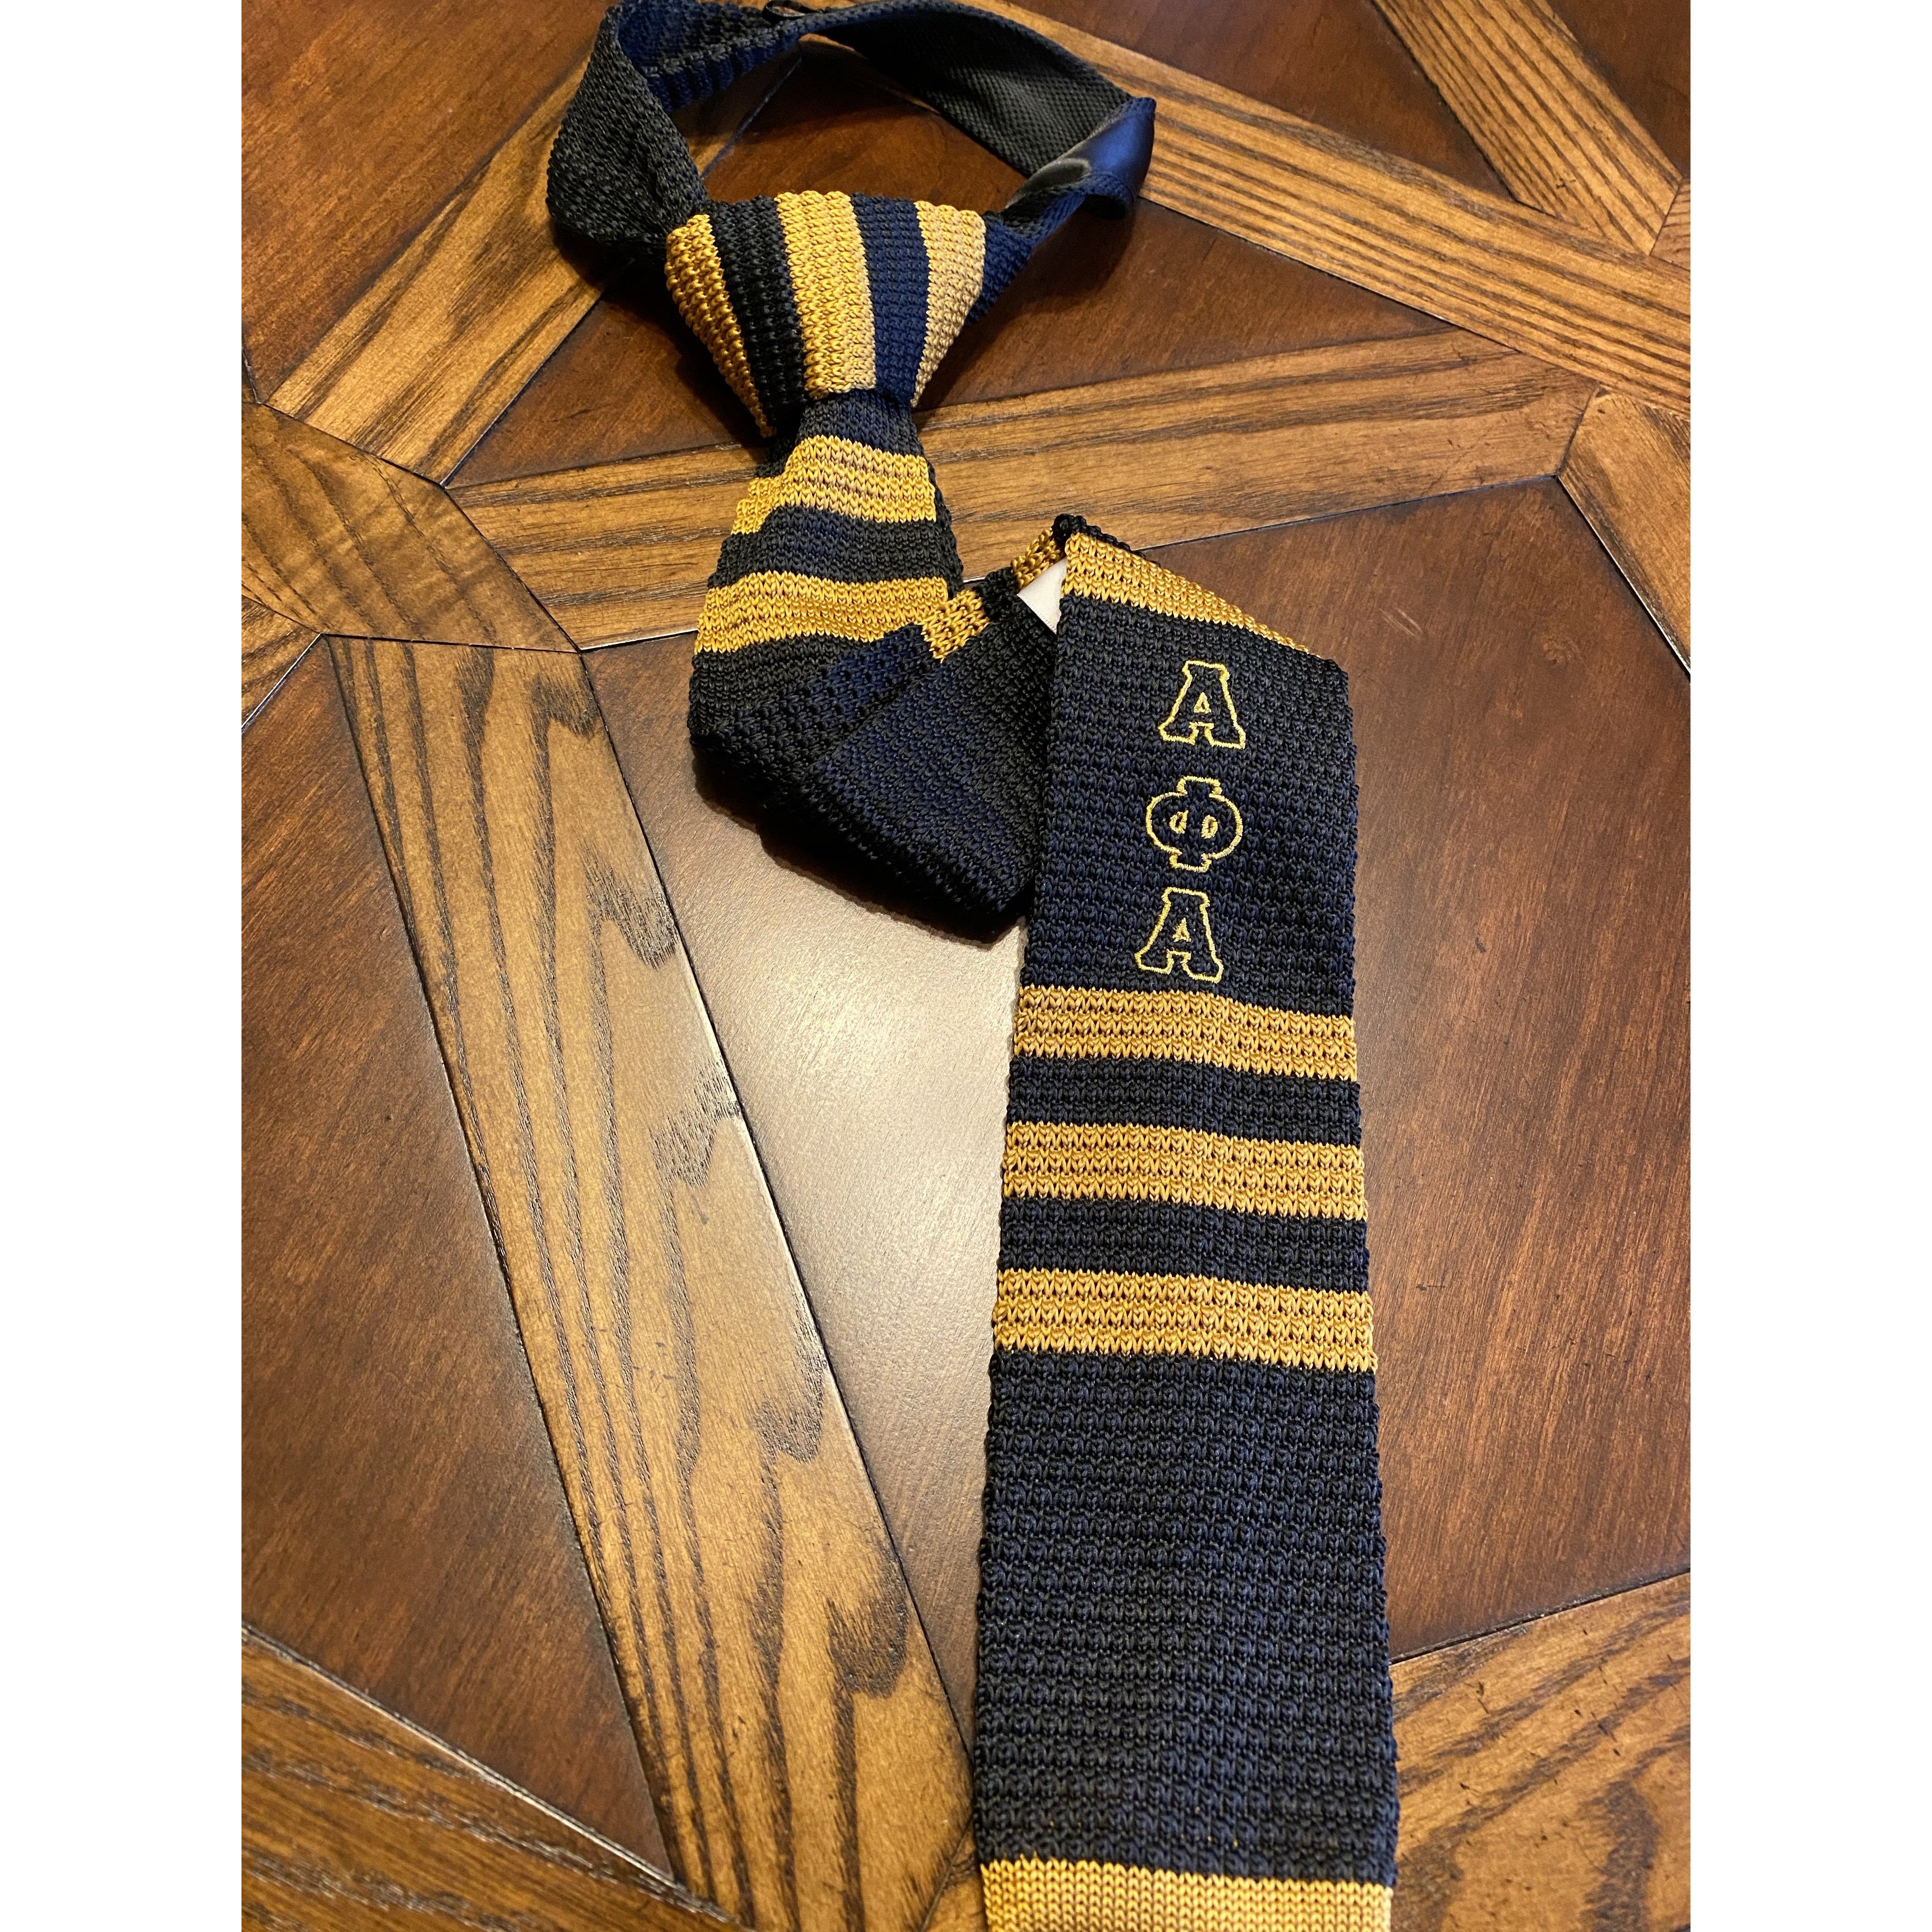 Black and Old Gold Alpha Knit Tie